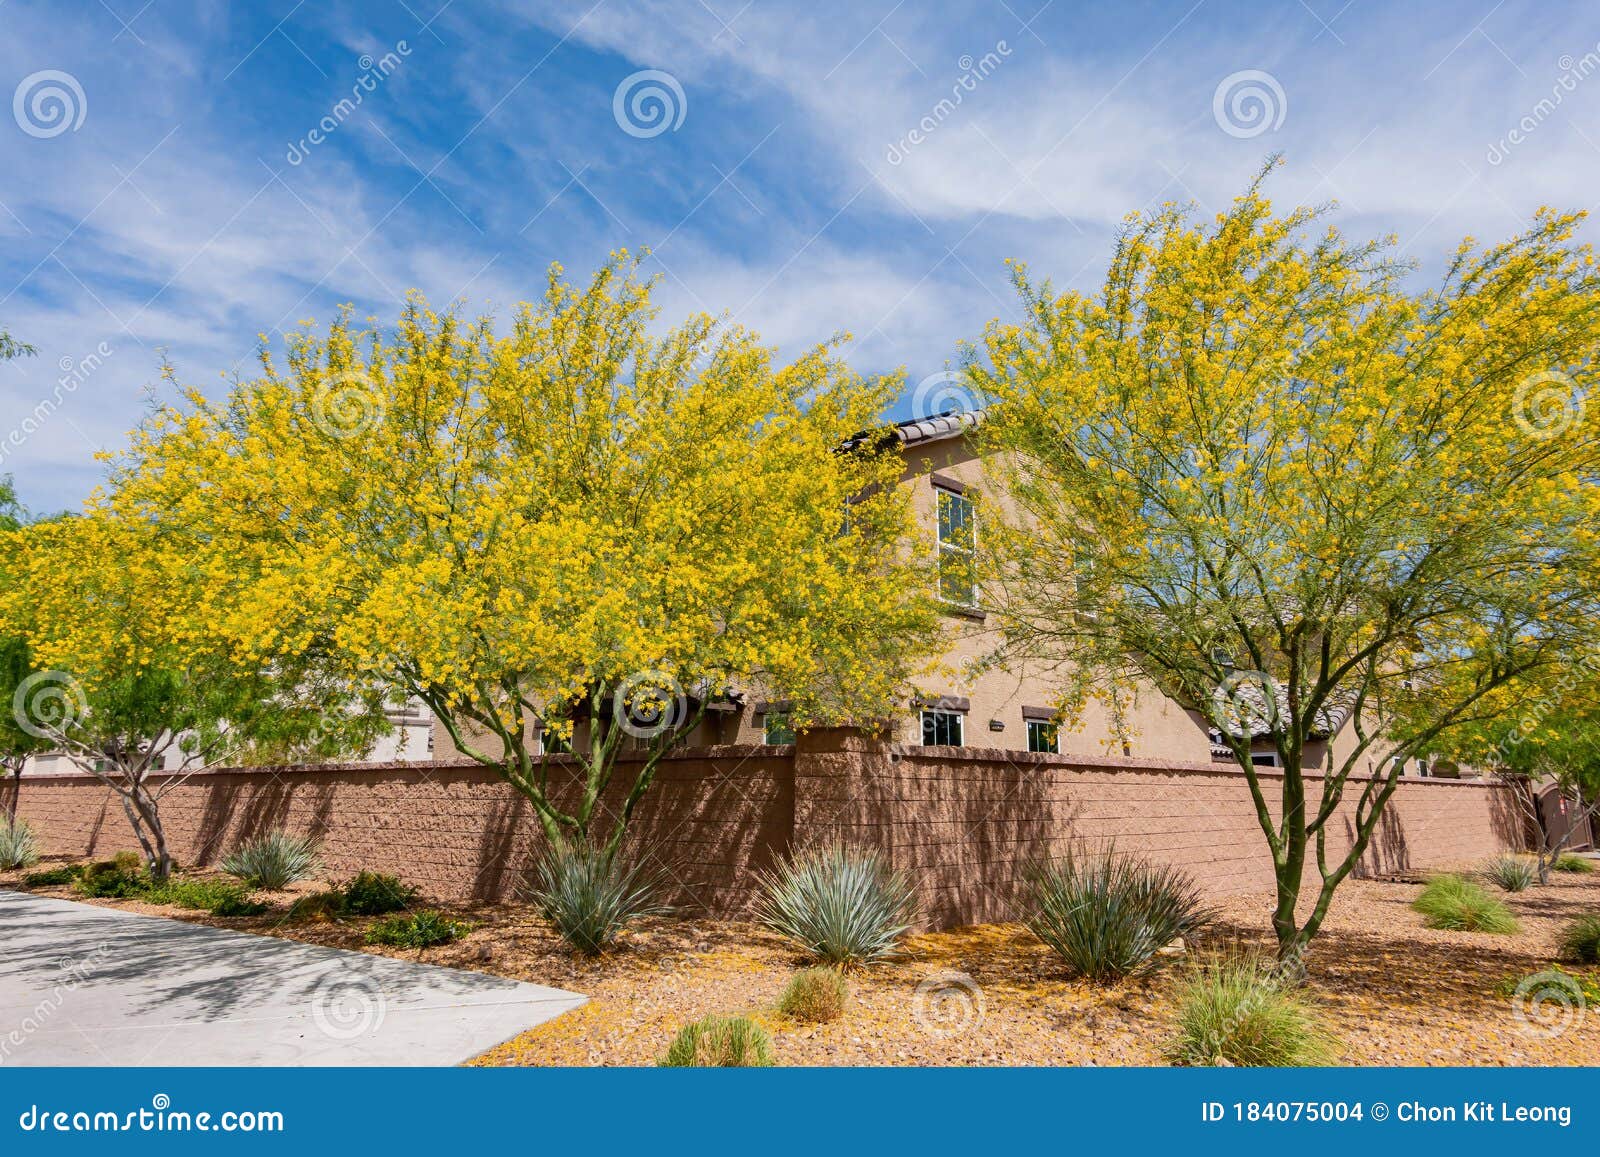 sunny view of parkinsonia florida blossom and a beautiful residence building